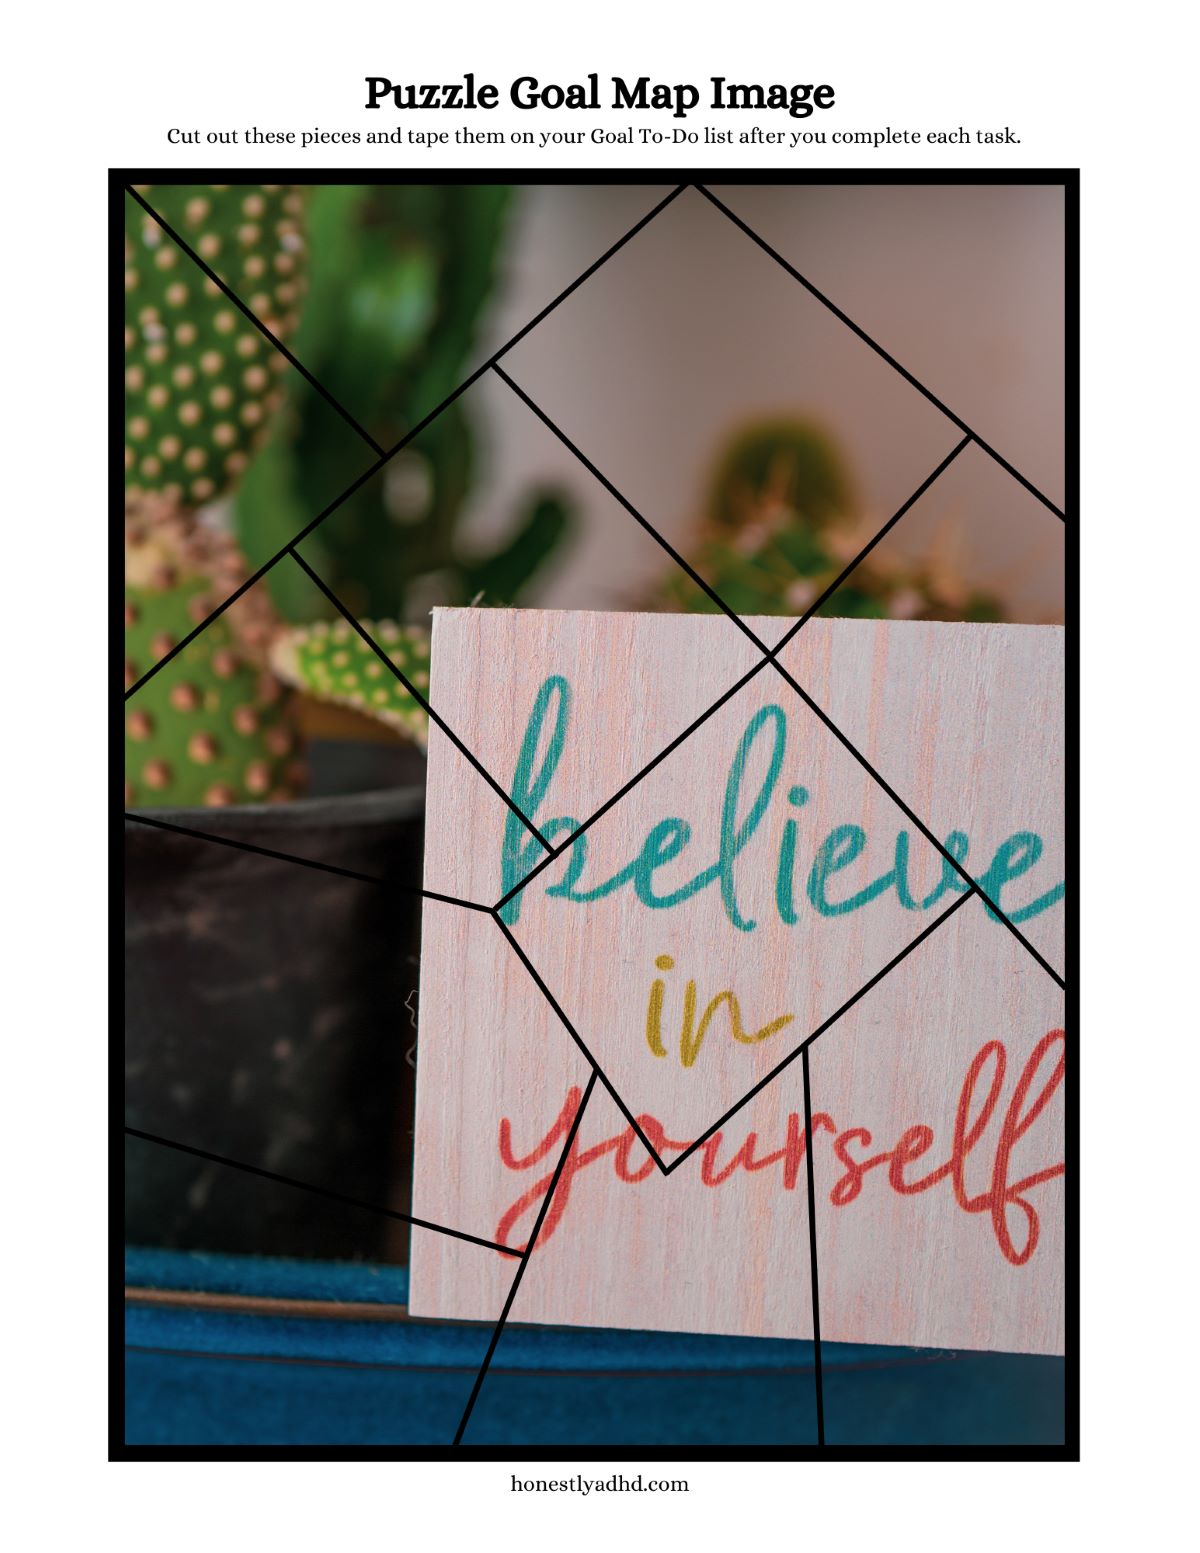 A puzzle printable that says "believe in yourself" with cactus in the background.